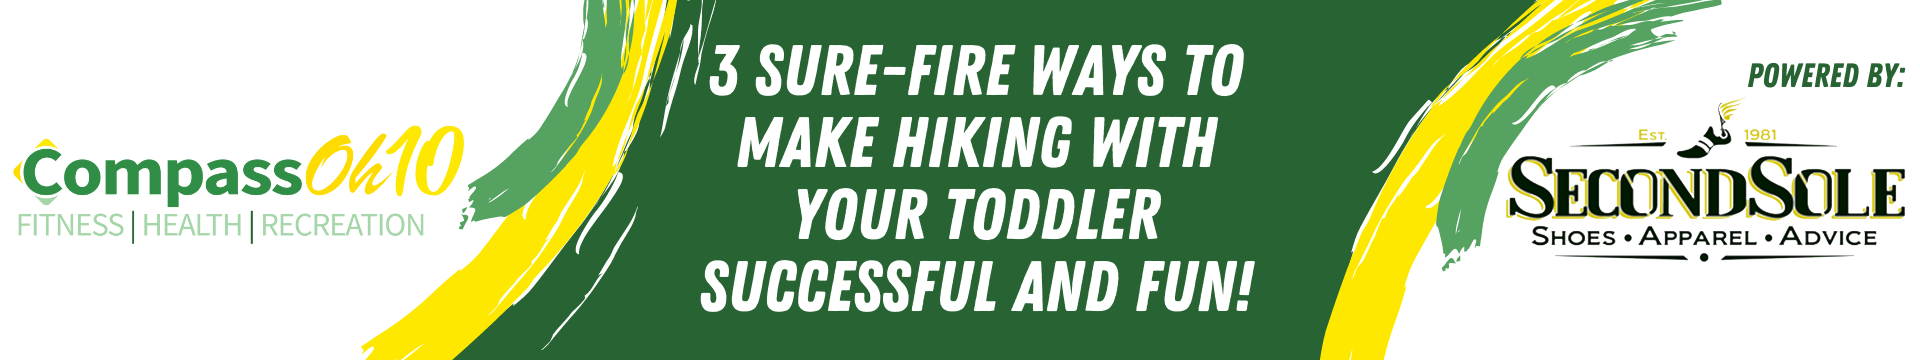 3 Sure-Fire Ways to Make Hiking With Your Toddler Successful and Fun!